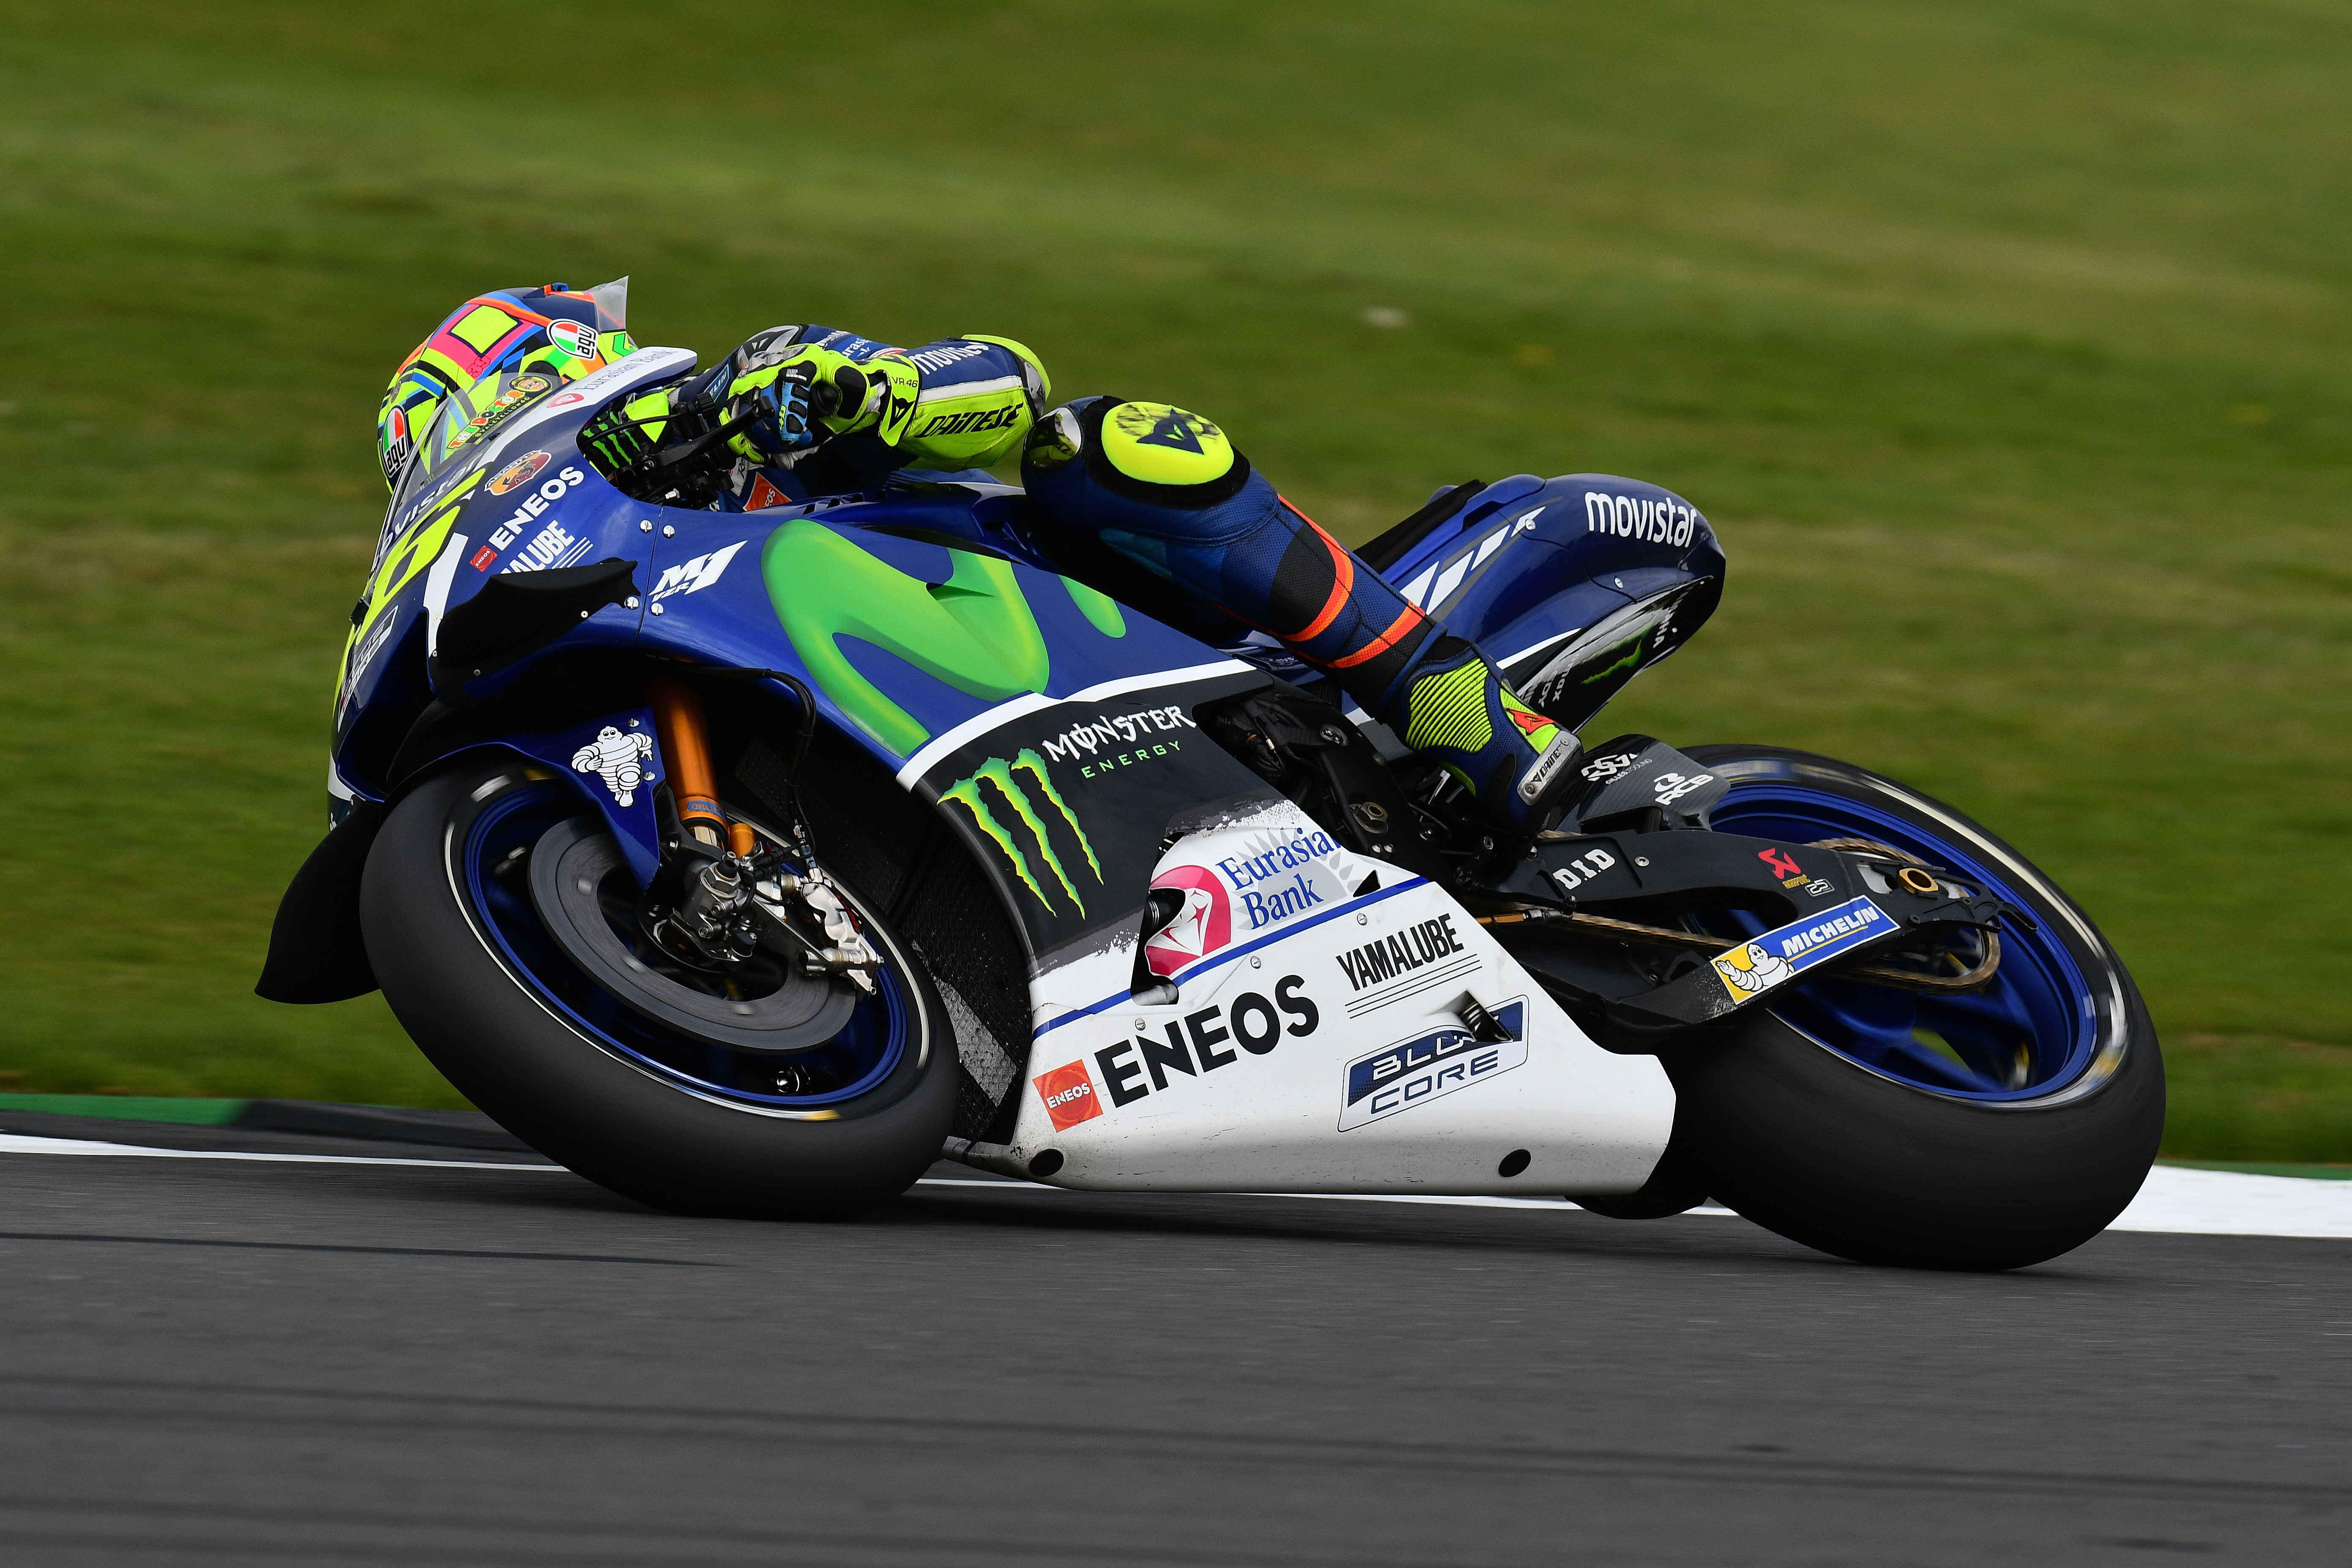 Michelin and Suzuki score Silverstone success as vinales is victorious